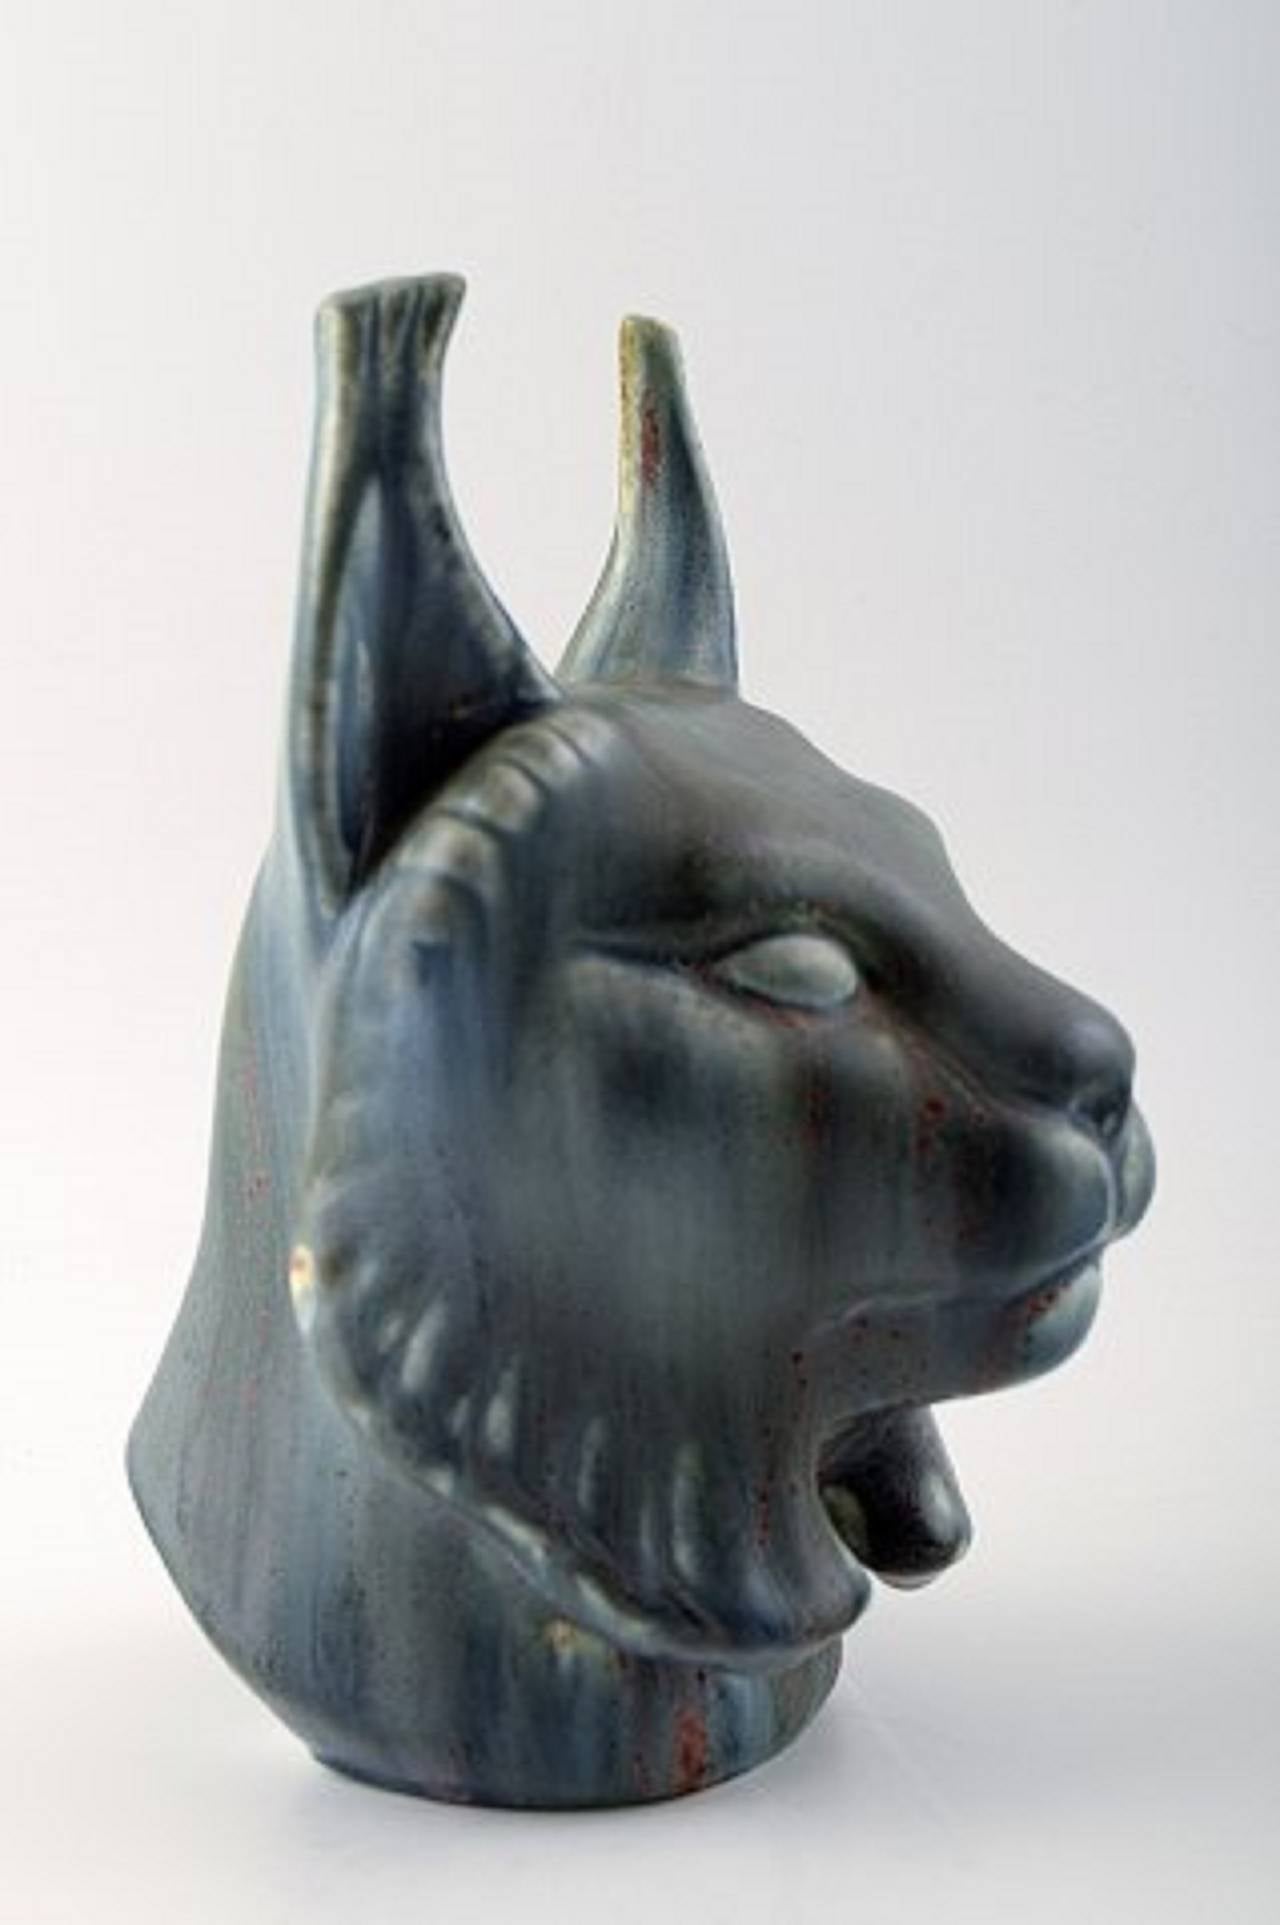 Rörstrand stoneware figure of Gunnar Nylund, lynx.
In perfect condition. 2. factory quality.
Measures 22 cm.